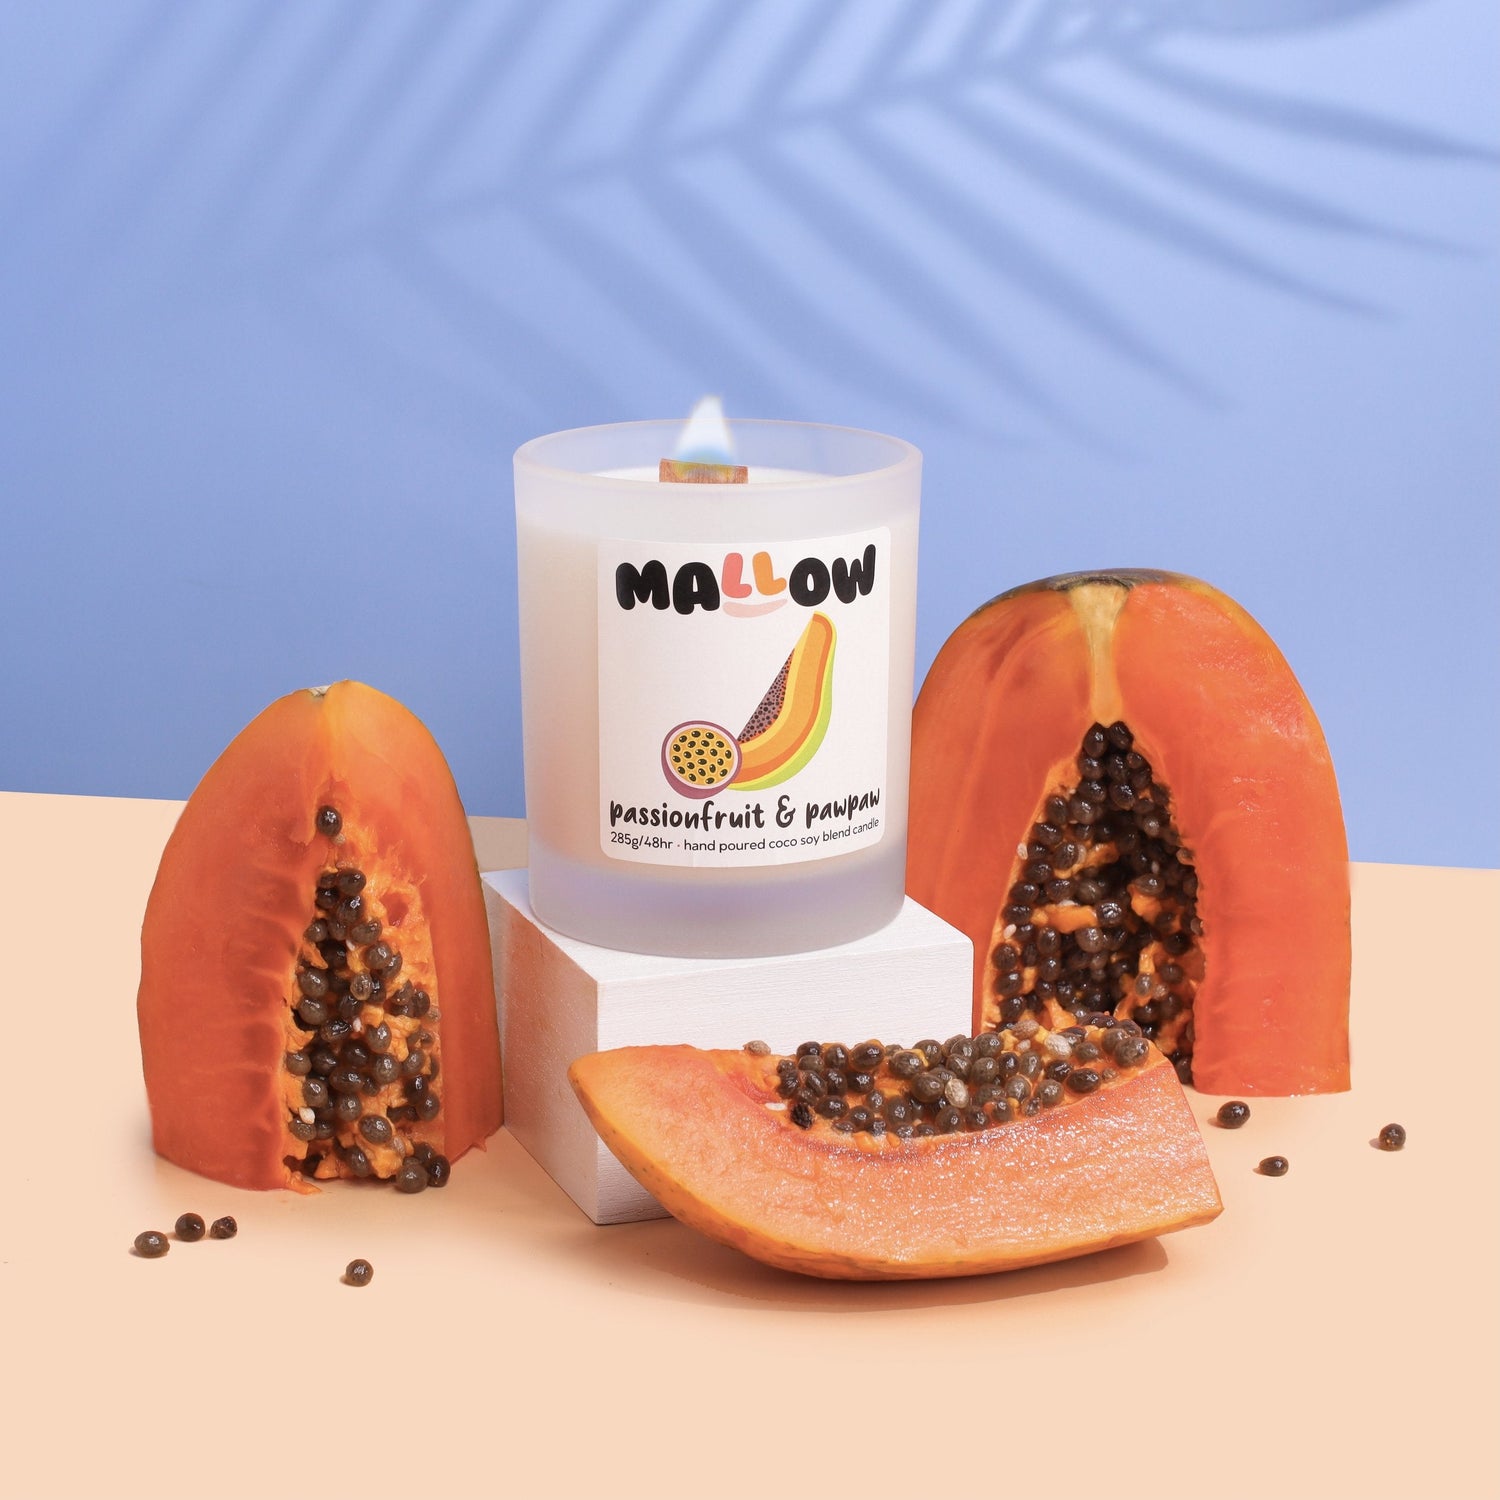 Mallow woodwick candles